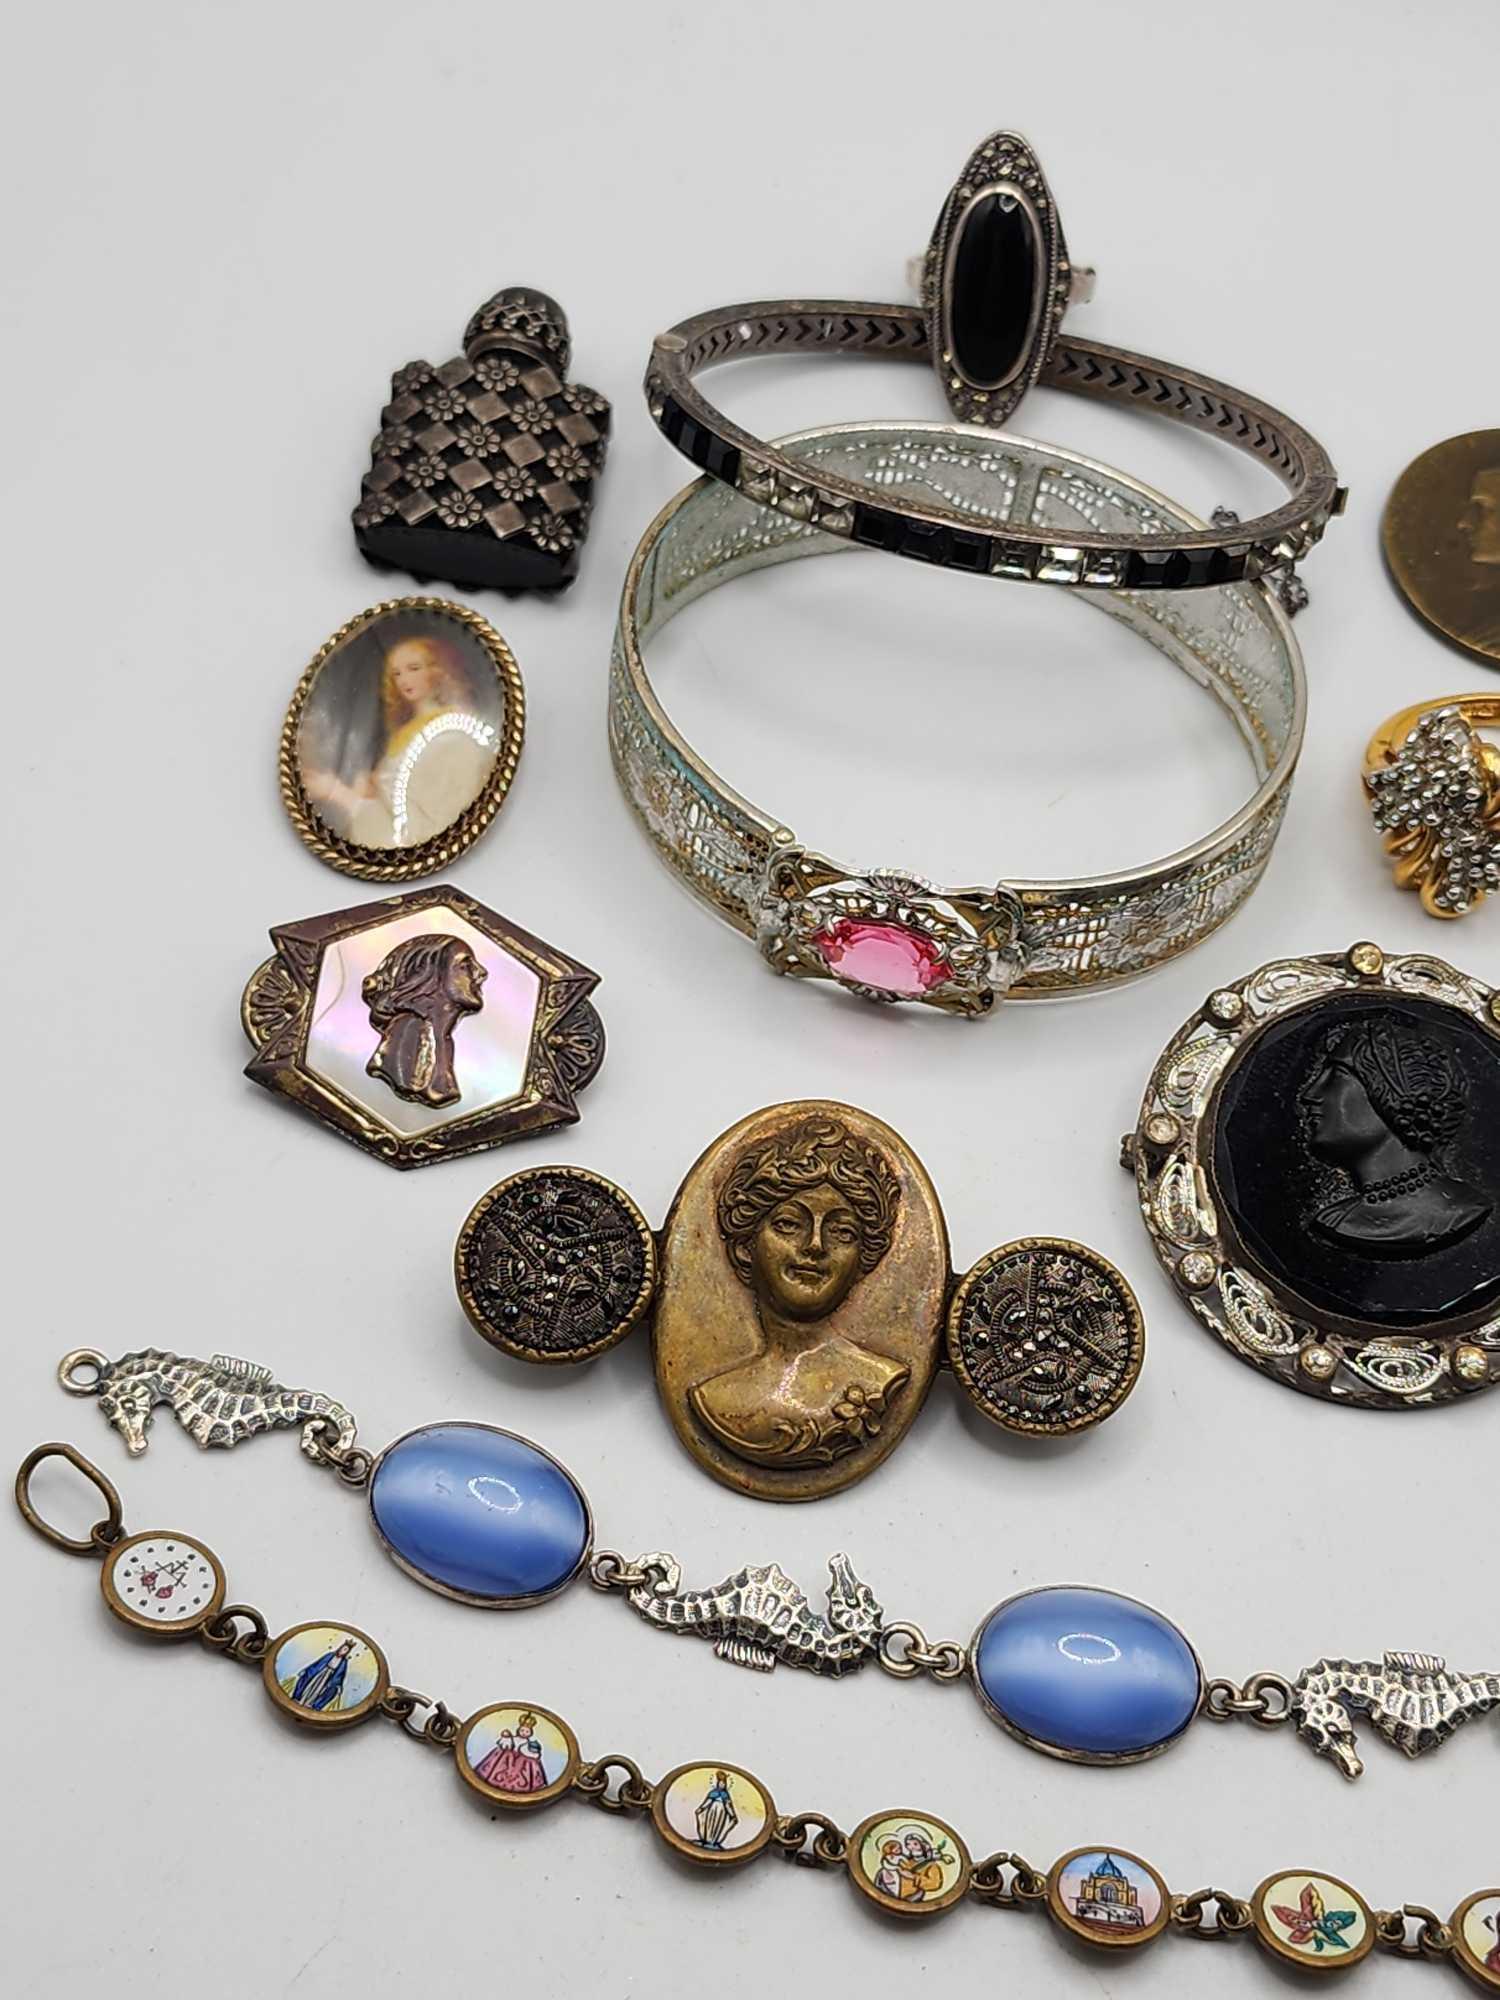 Antique Victorian jewelry: bracelets, pins, cameos